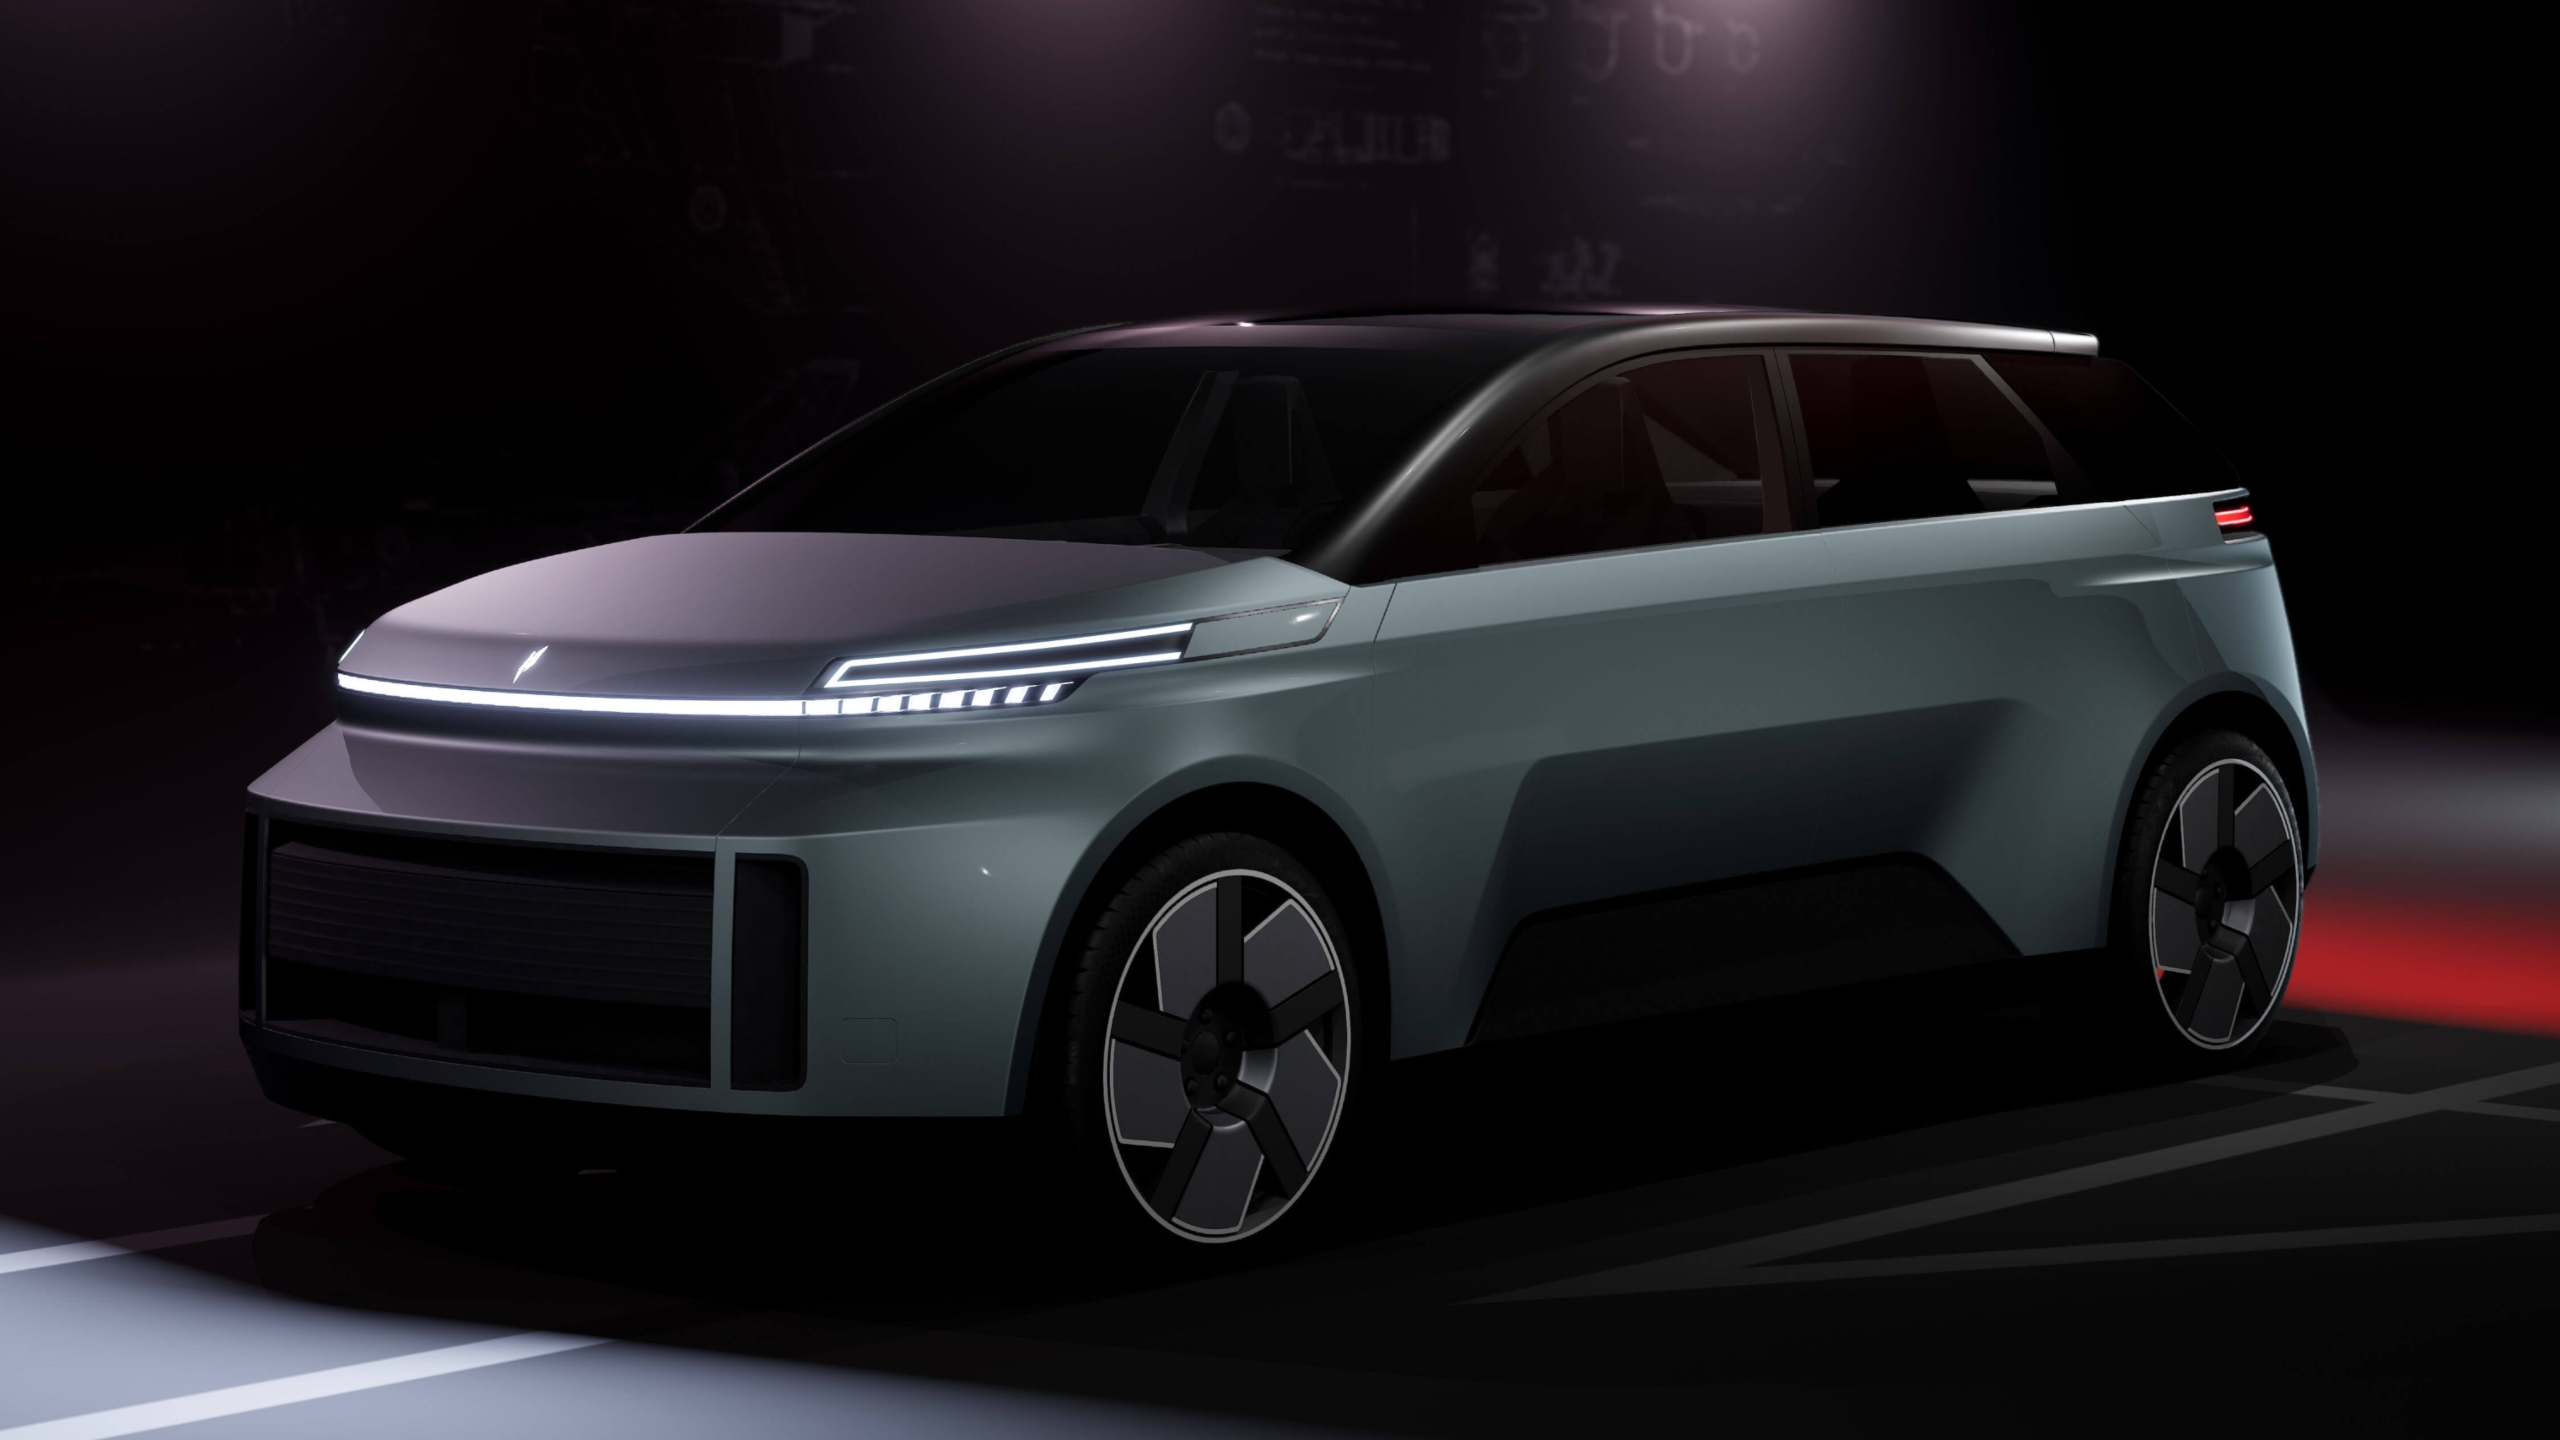 Canadian-made ‘Project Arrow’ EV debuts at CES 2023